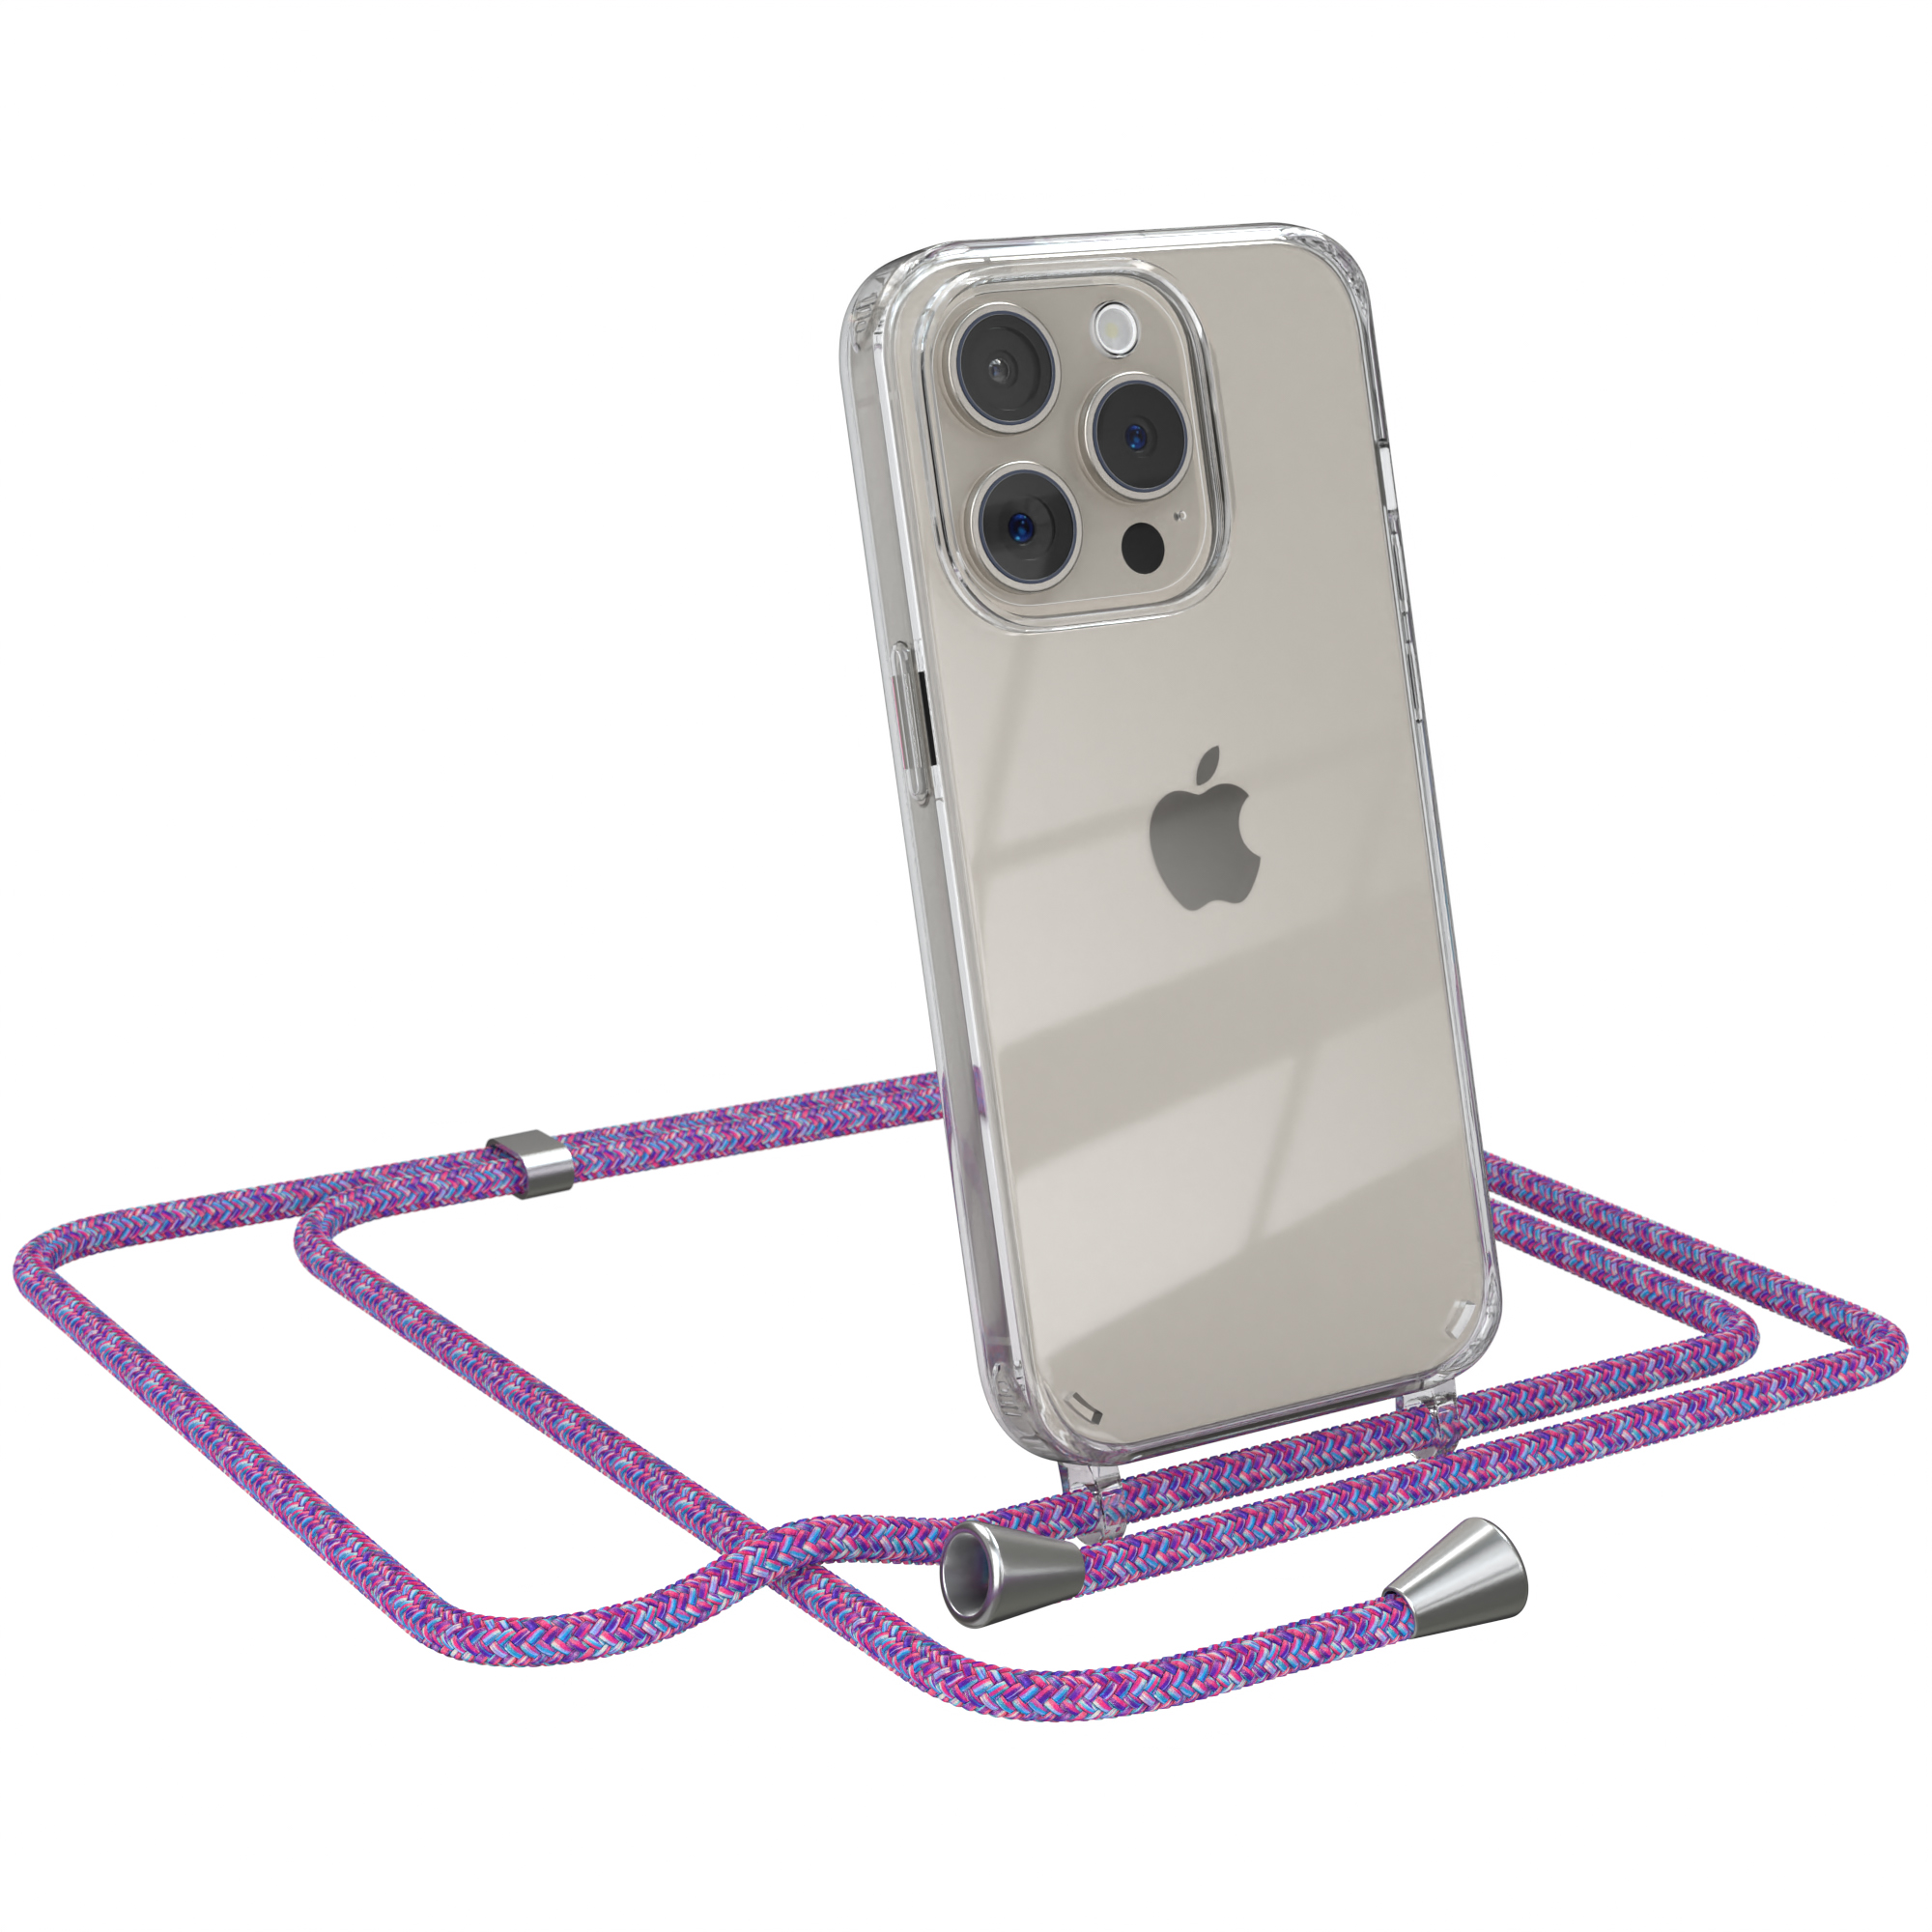 EAZY CASE Clear Cover iPhone / Apple, Silber Lila Clips mit Pro, Umhängeband, 15 Umhängetasche